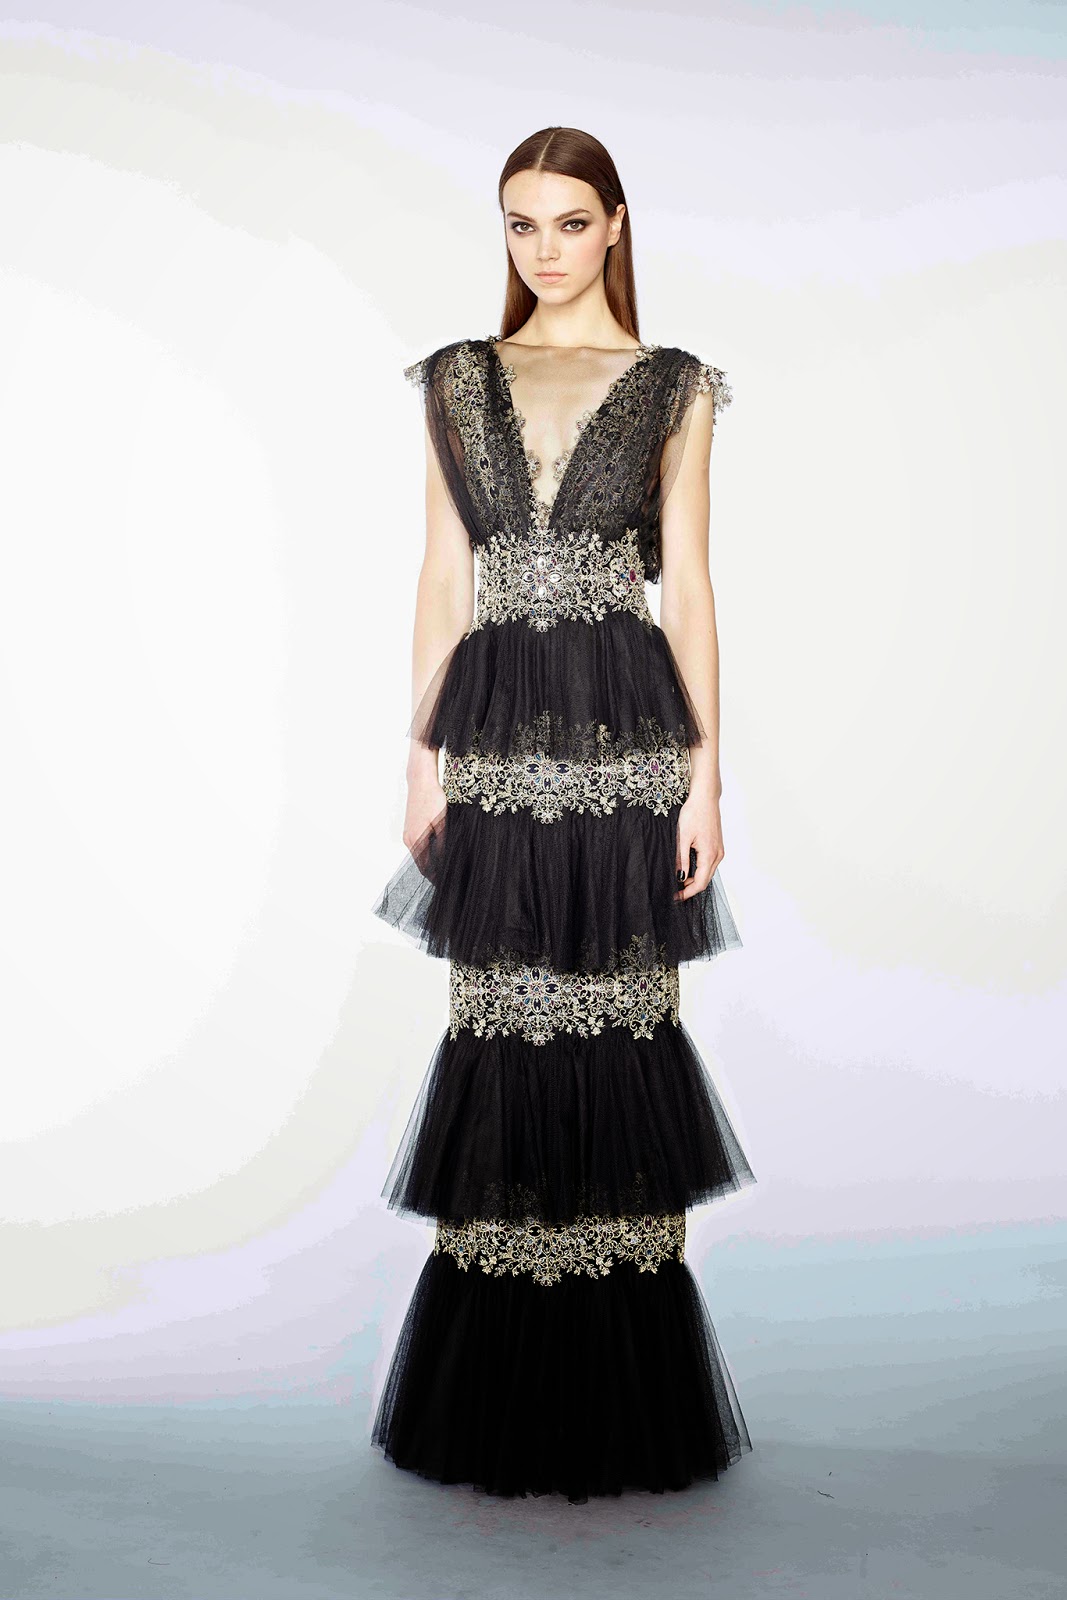 Serendipitylands: MARCHESA COLLECTION PRE-FALL 2015